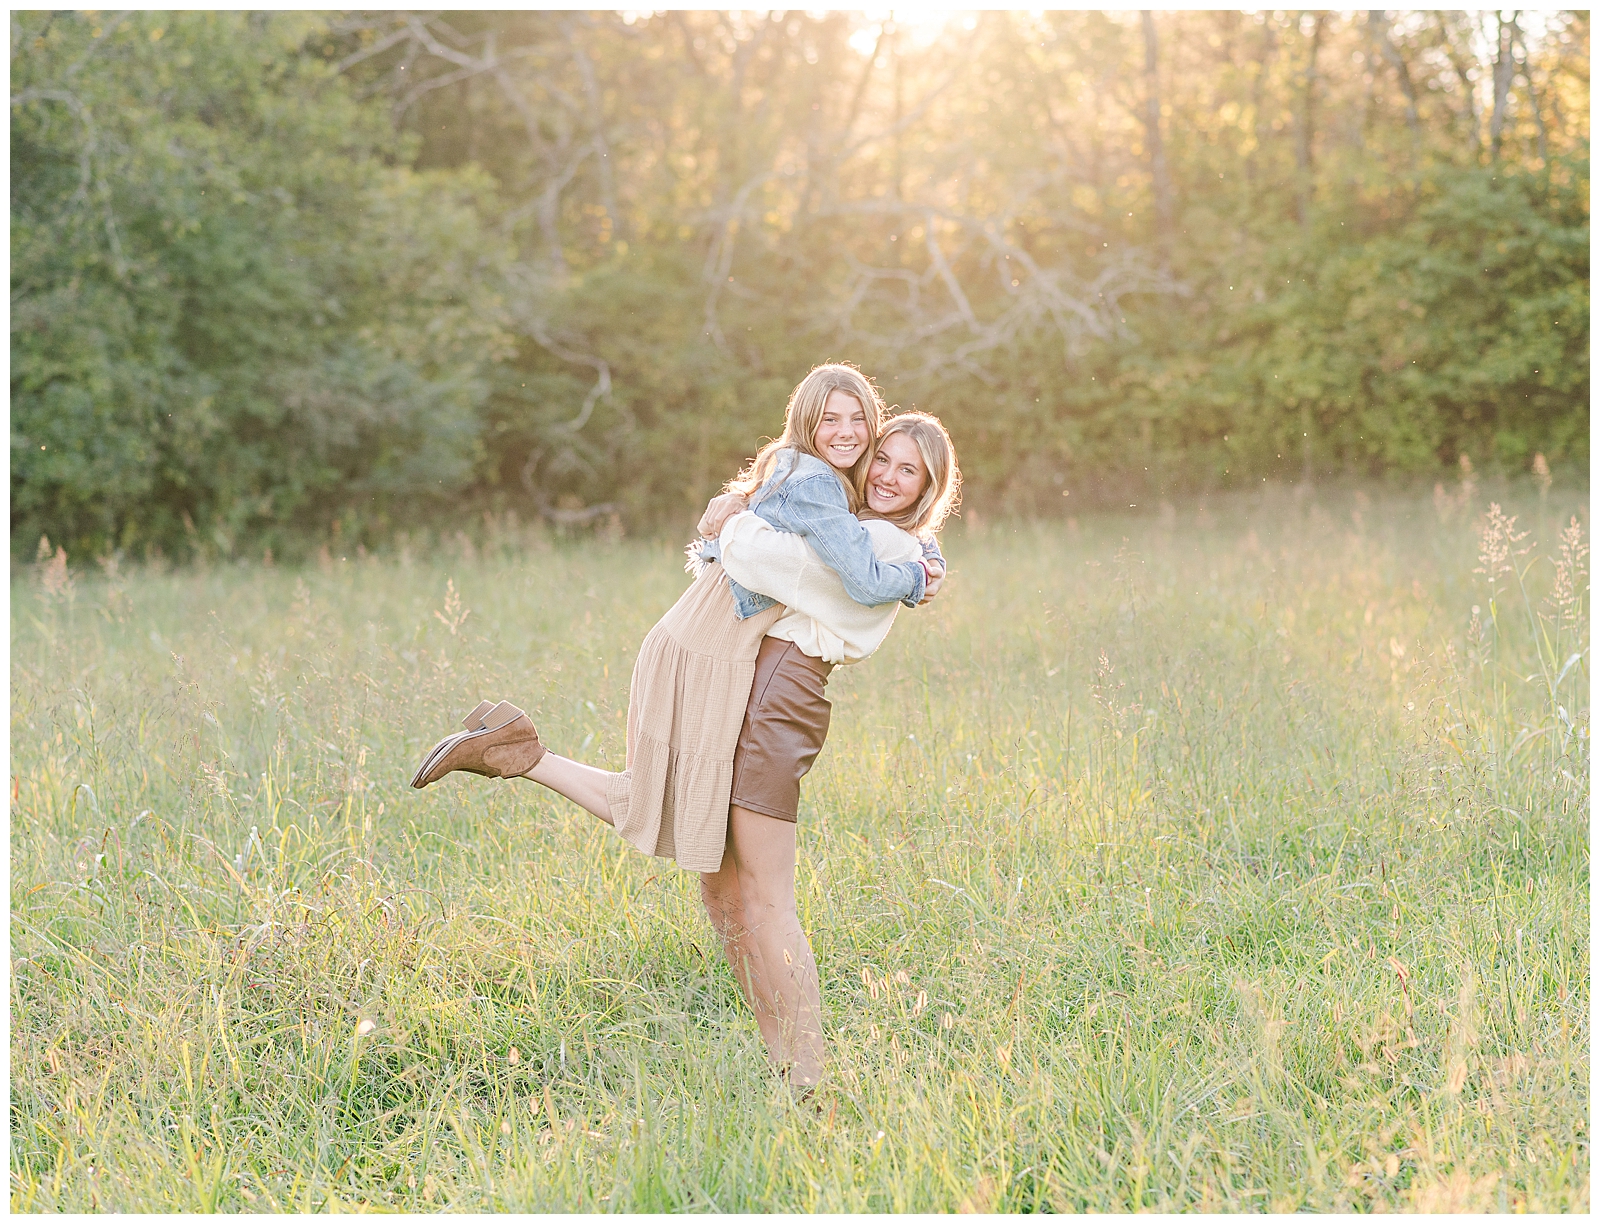 Sisters hugging during their legacy family portrait session in Nashville, TN